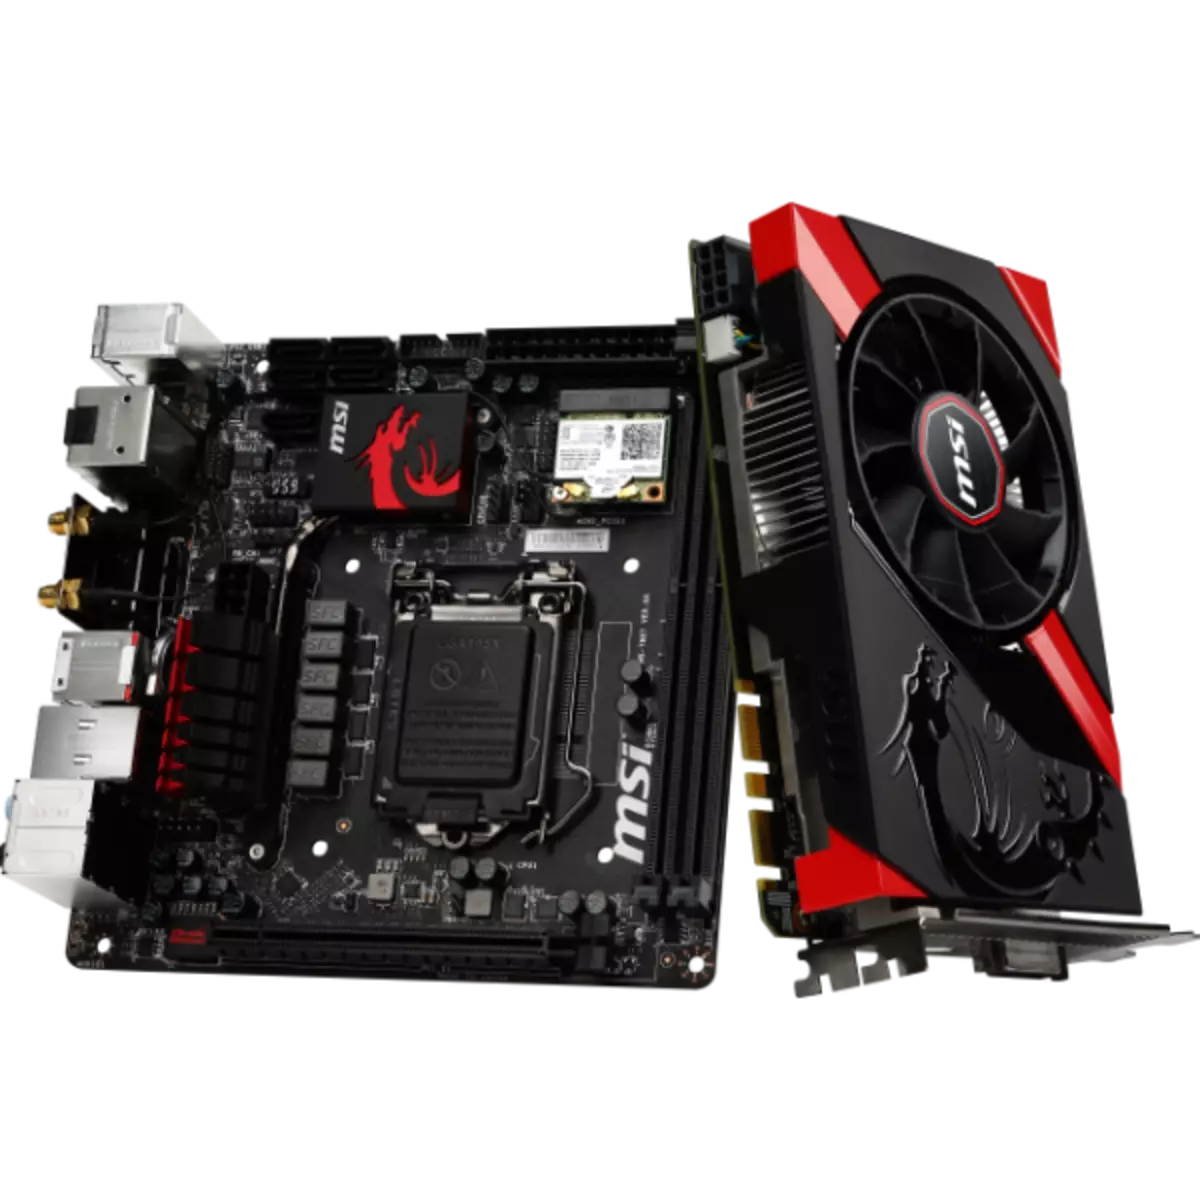 How to check the video card compatibility and motherboard